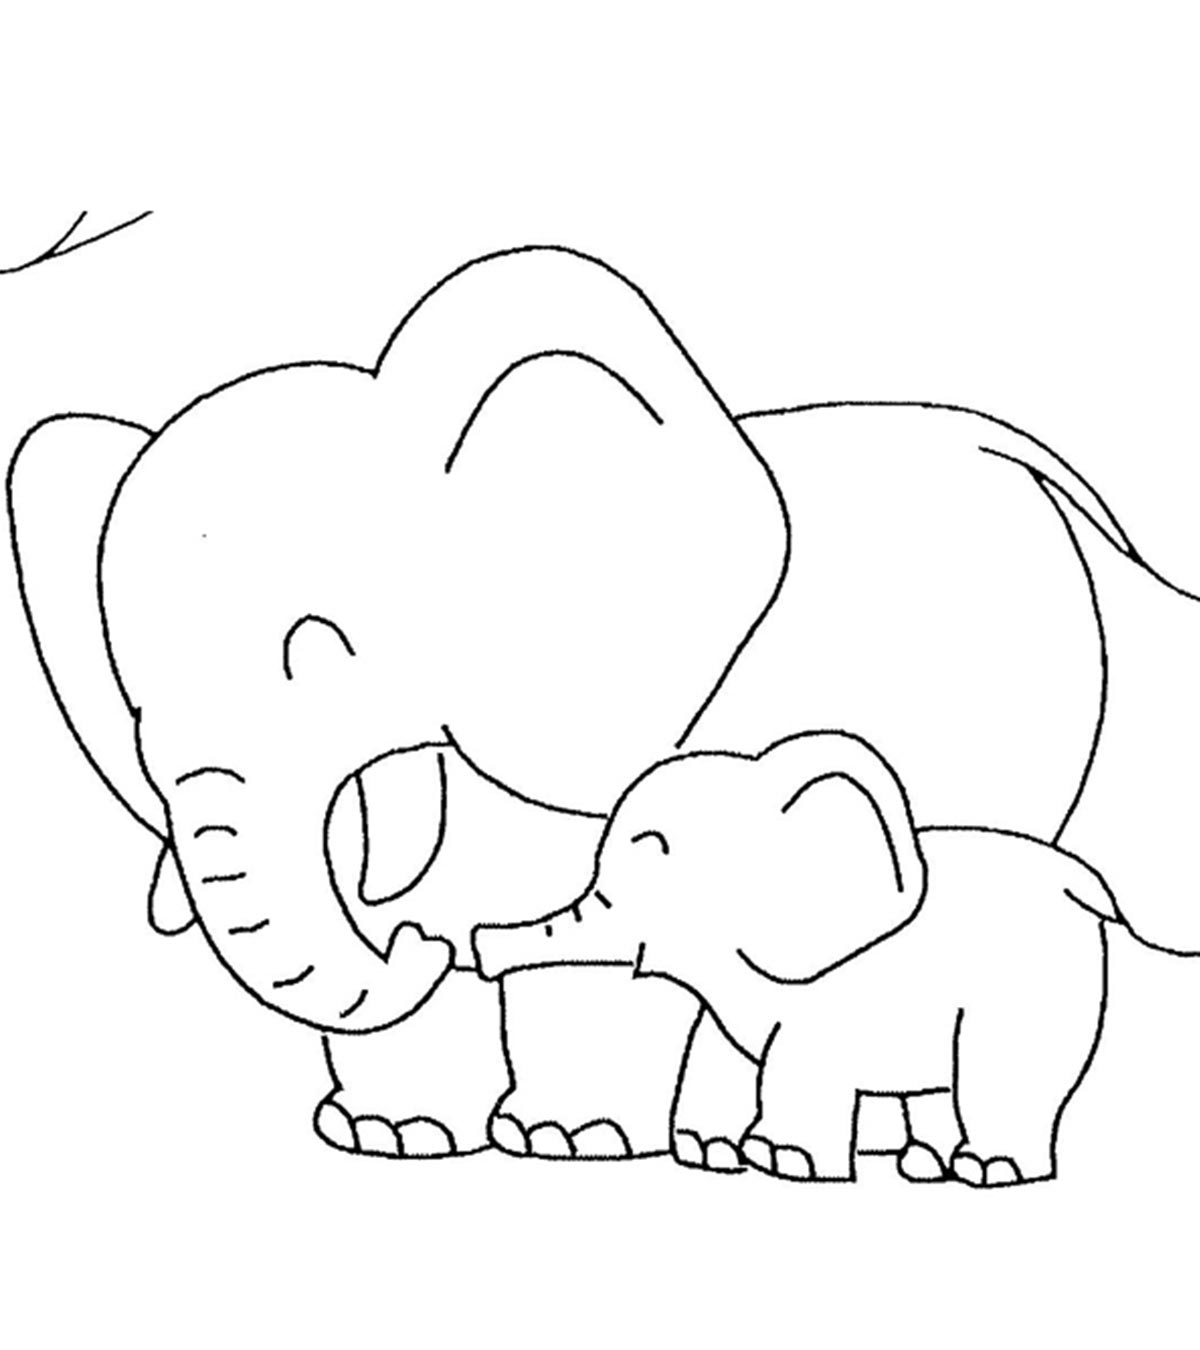 Top 10 Jungle Animals Coloring Pages For Your Naughty Kid